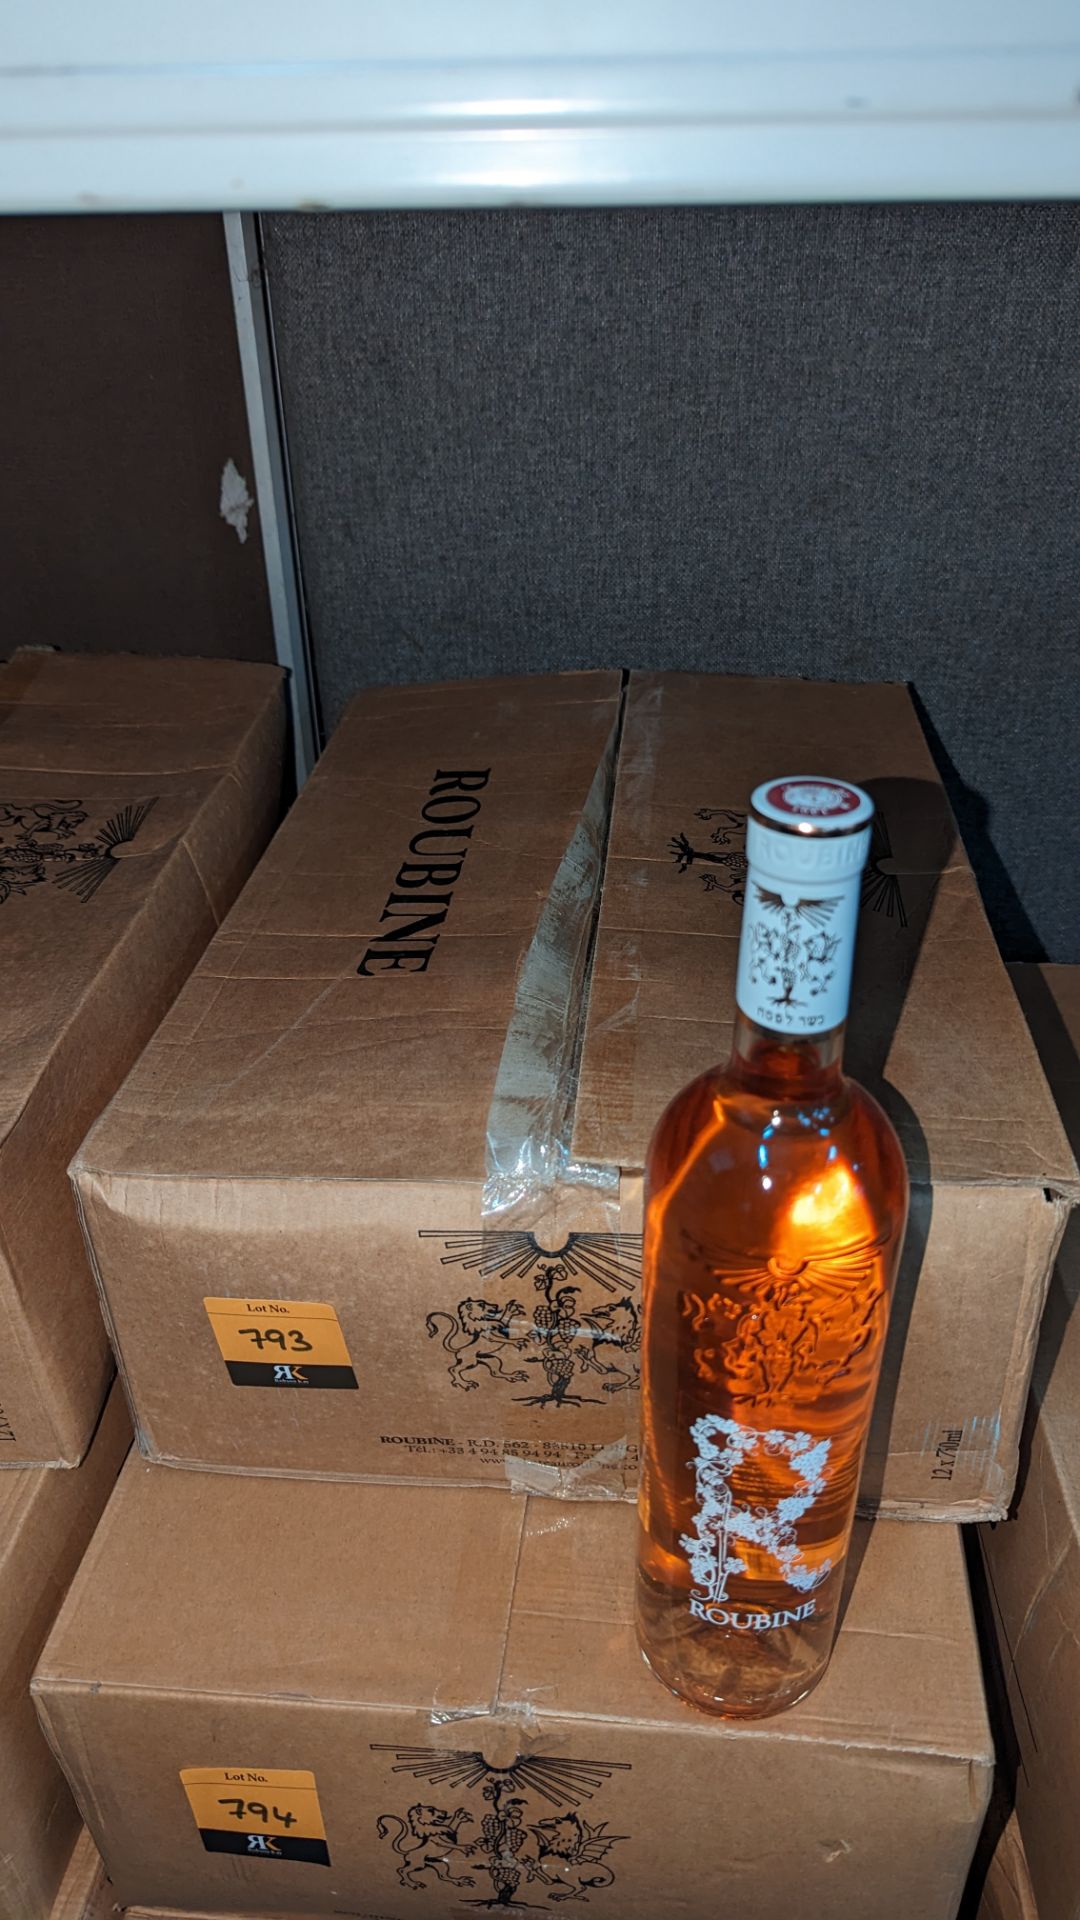 12 bottles of R de Roubine 2020 Côtes de Provence French rosé wine sold under AWRS number XQAW000001